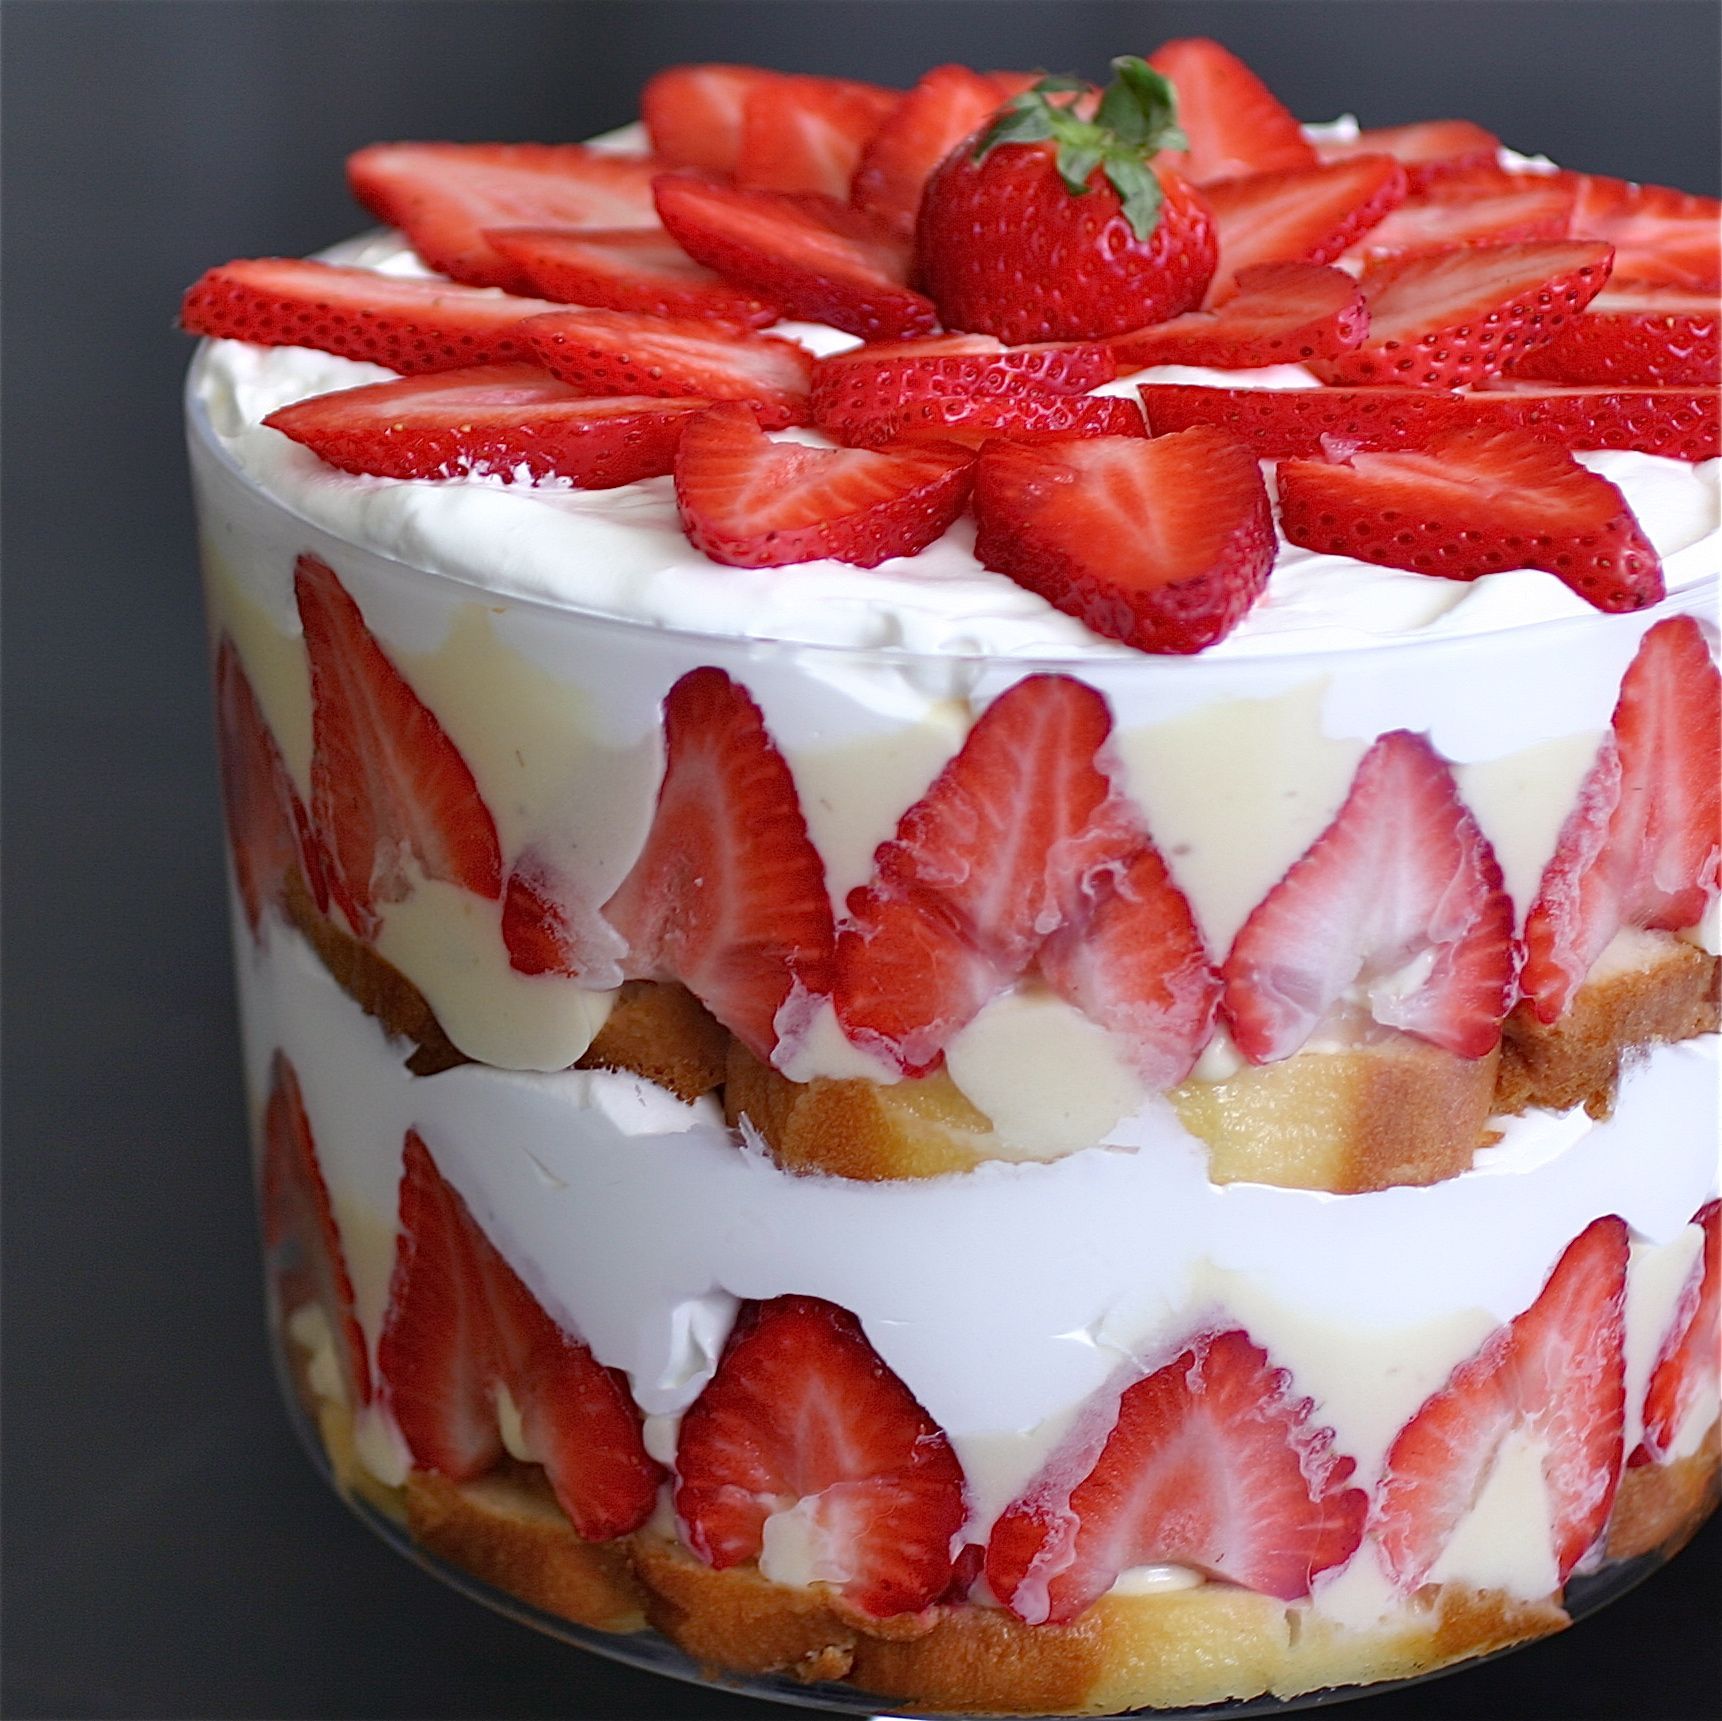 Strawberry Trifle:  This dessert is the perfect end to a Memorial Day BBQ.  Its super easy to put together and looks impressive